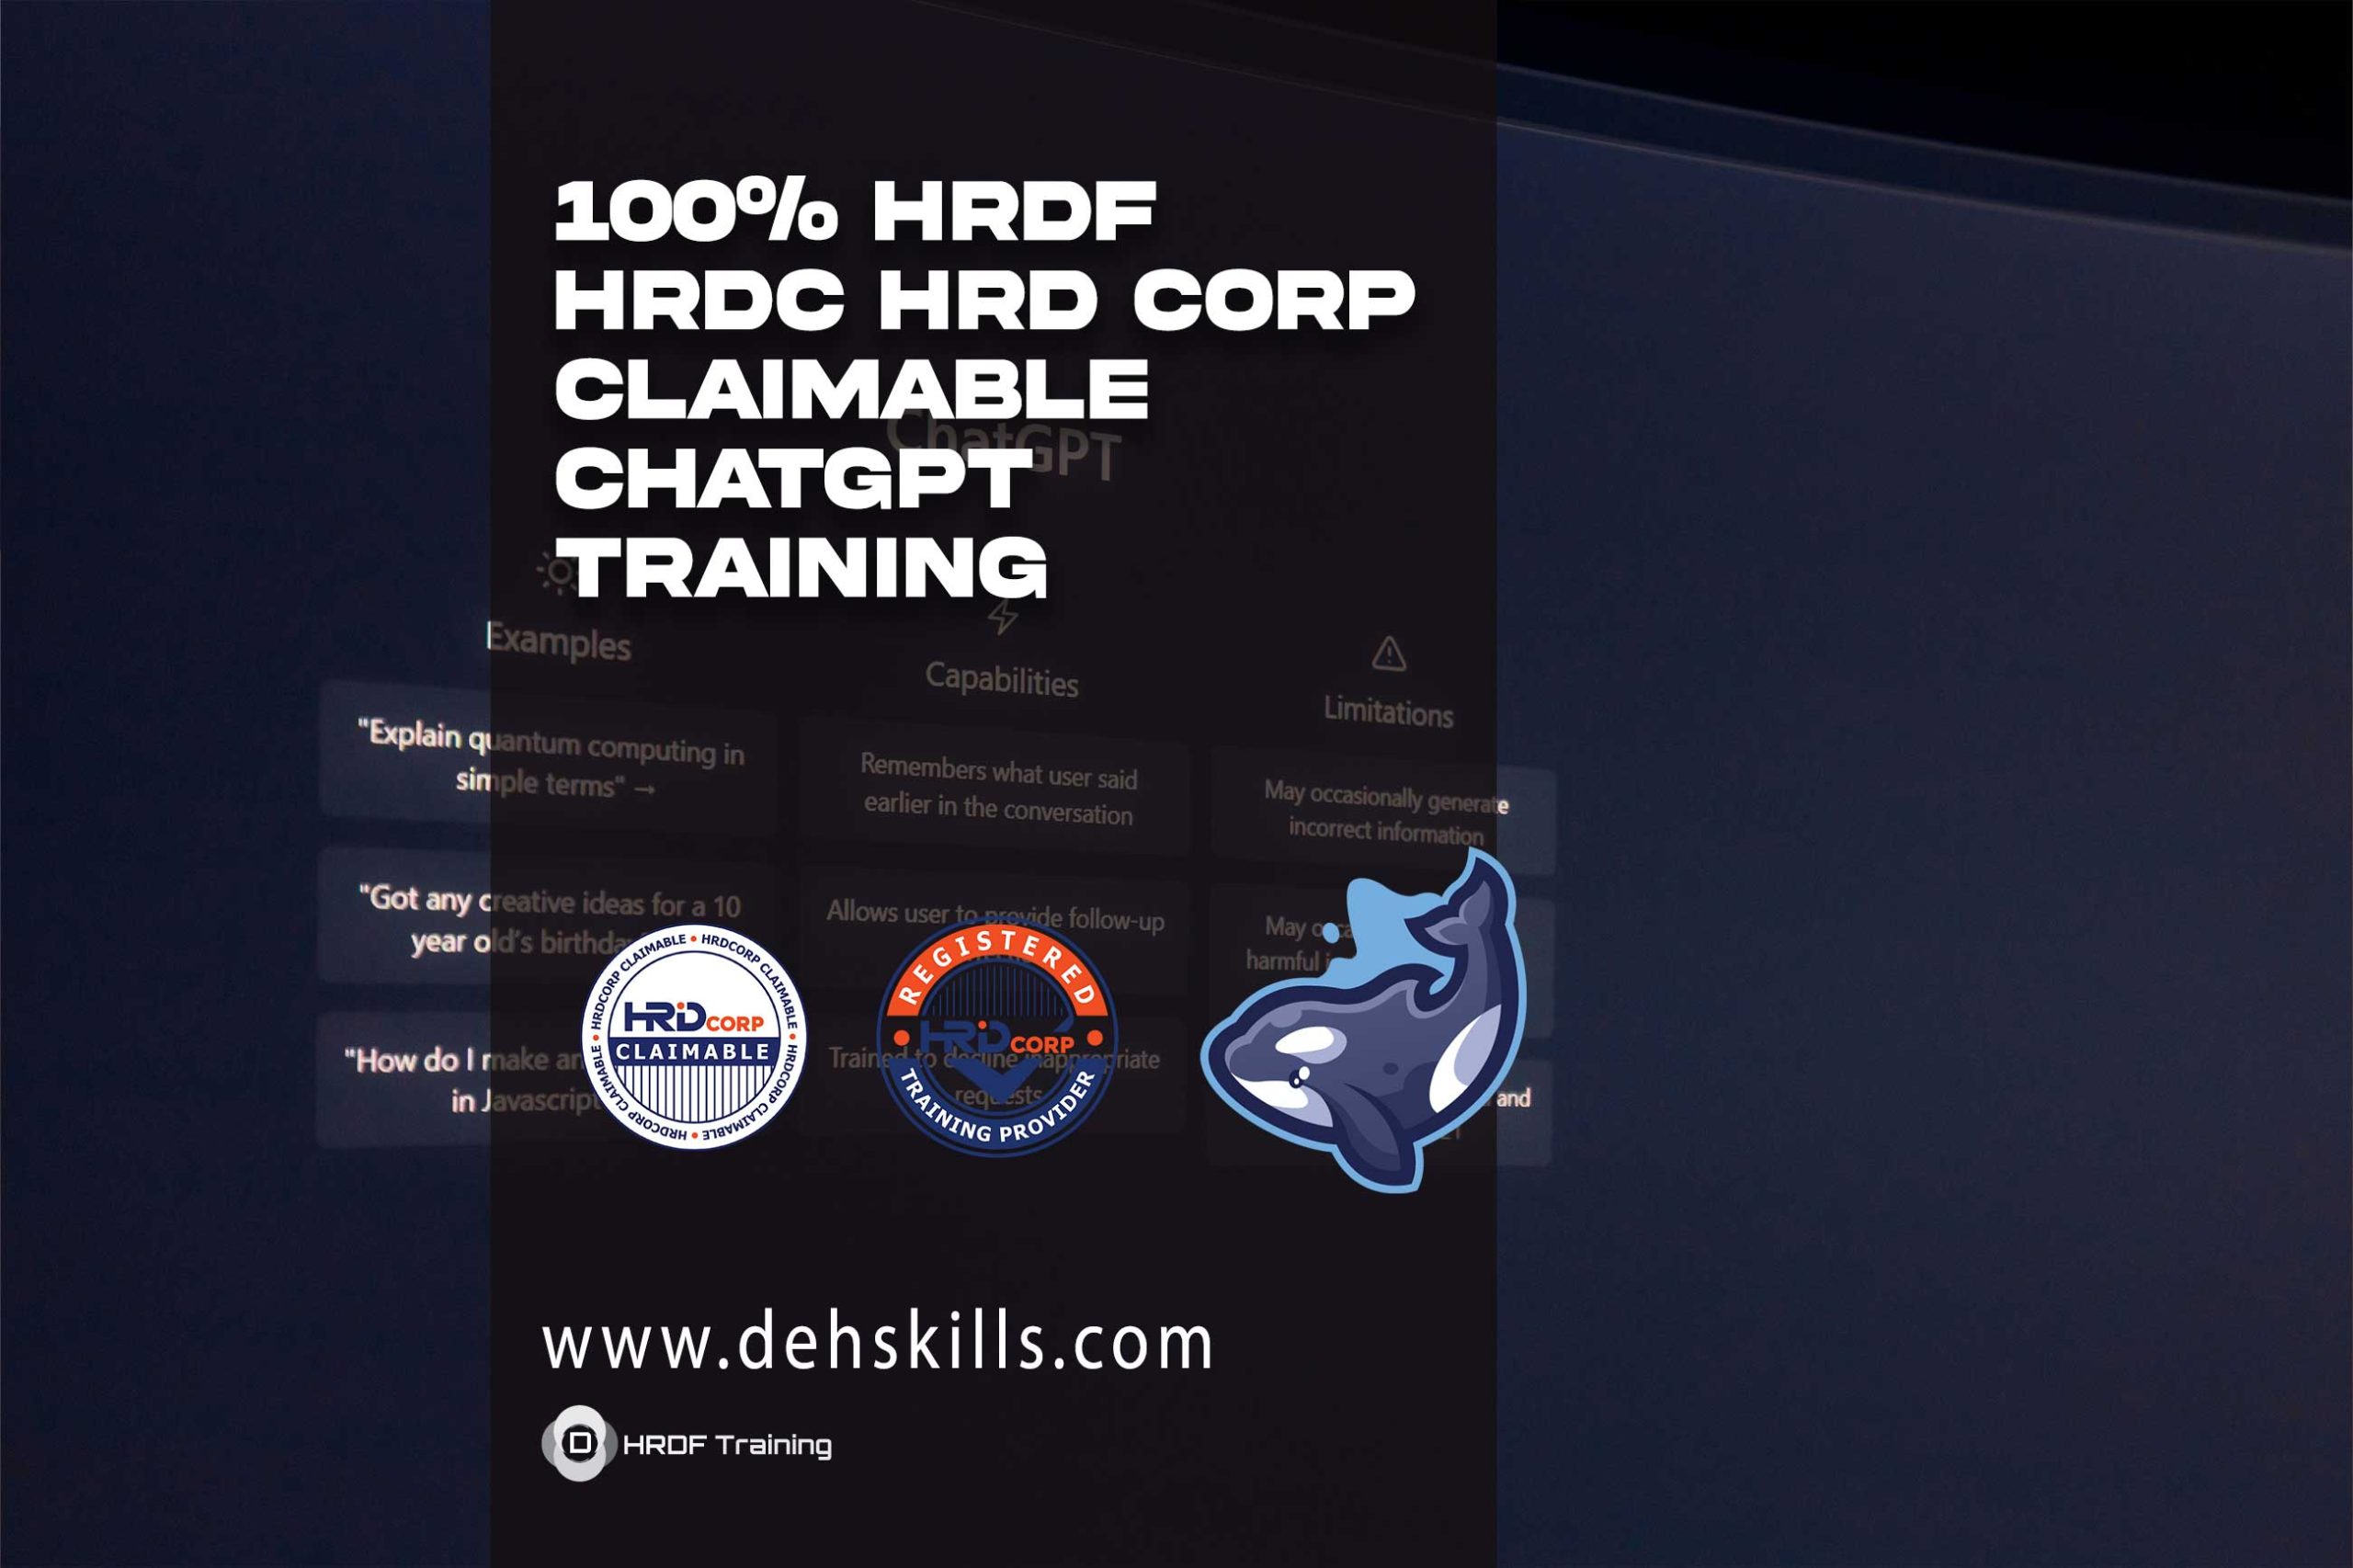 HRDF-HRDC-HRD-Corp-Claimable-ChatGPT-Training